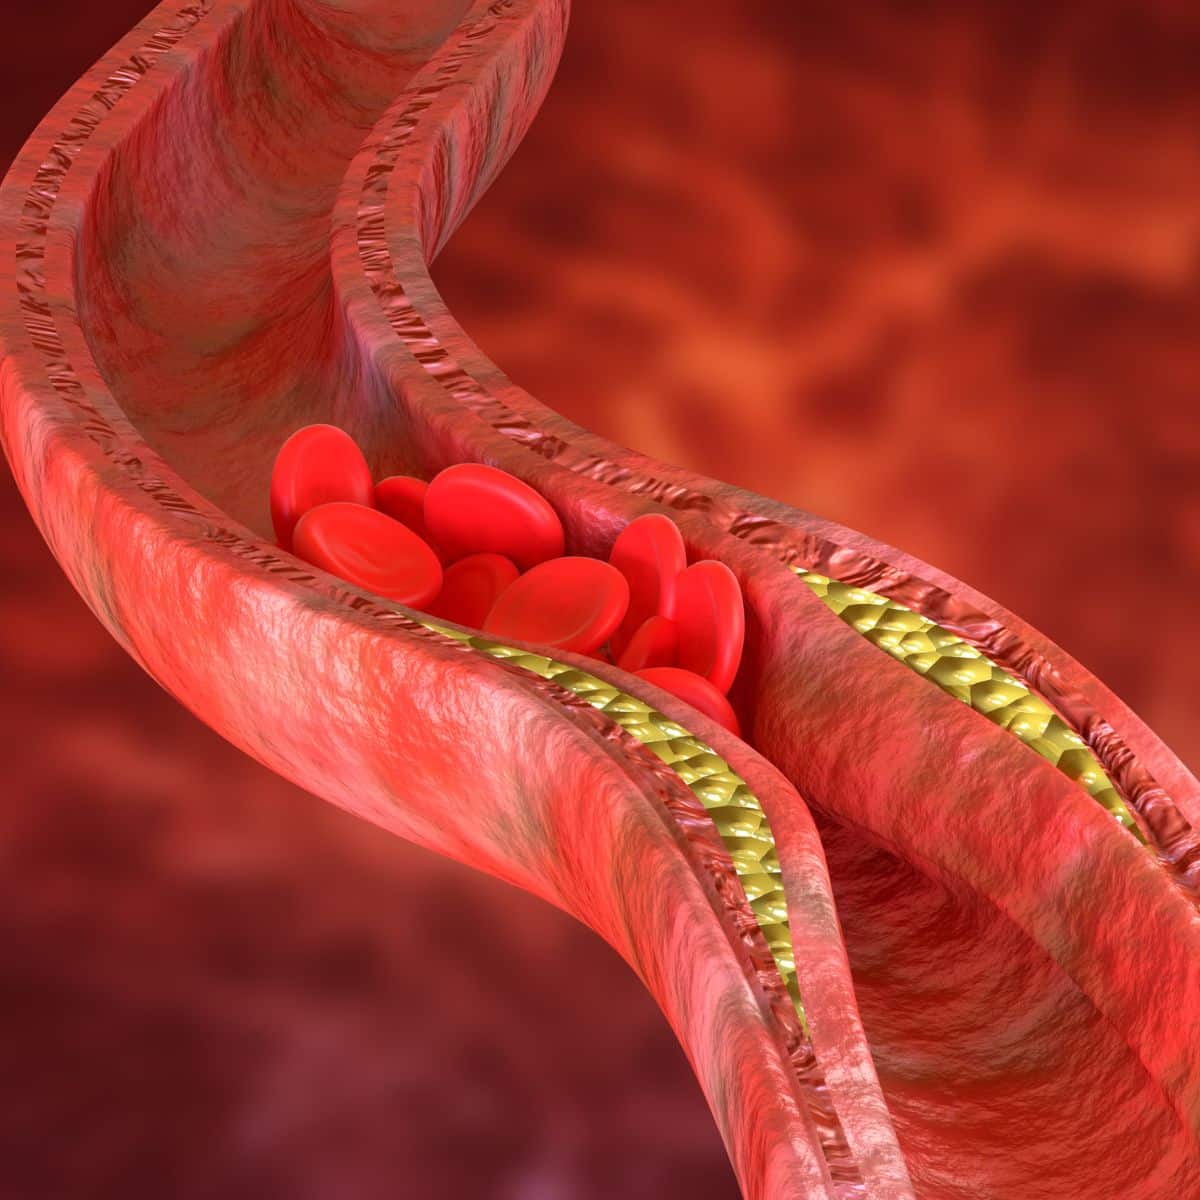 illustration of red blood cells flowing throughout the body